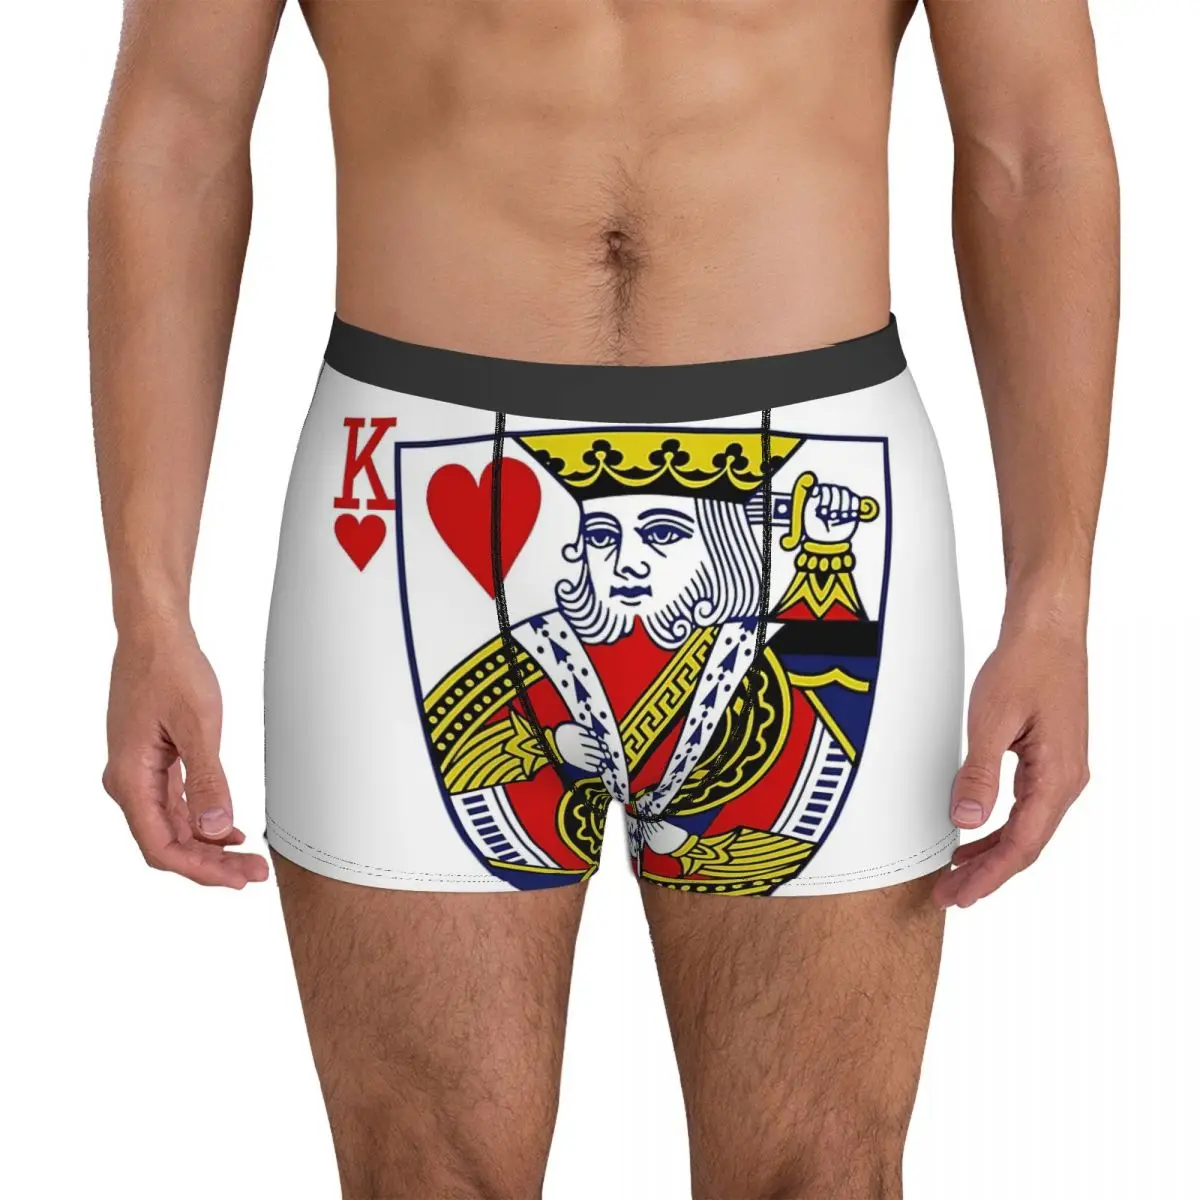 King Of Hearts Playing Card Underpants Breathbale Panties Male Underwear Print Shorts Boxer Briefs фигурка ubicollectibles watch dogs king of hearts